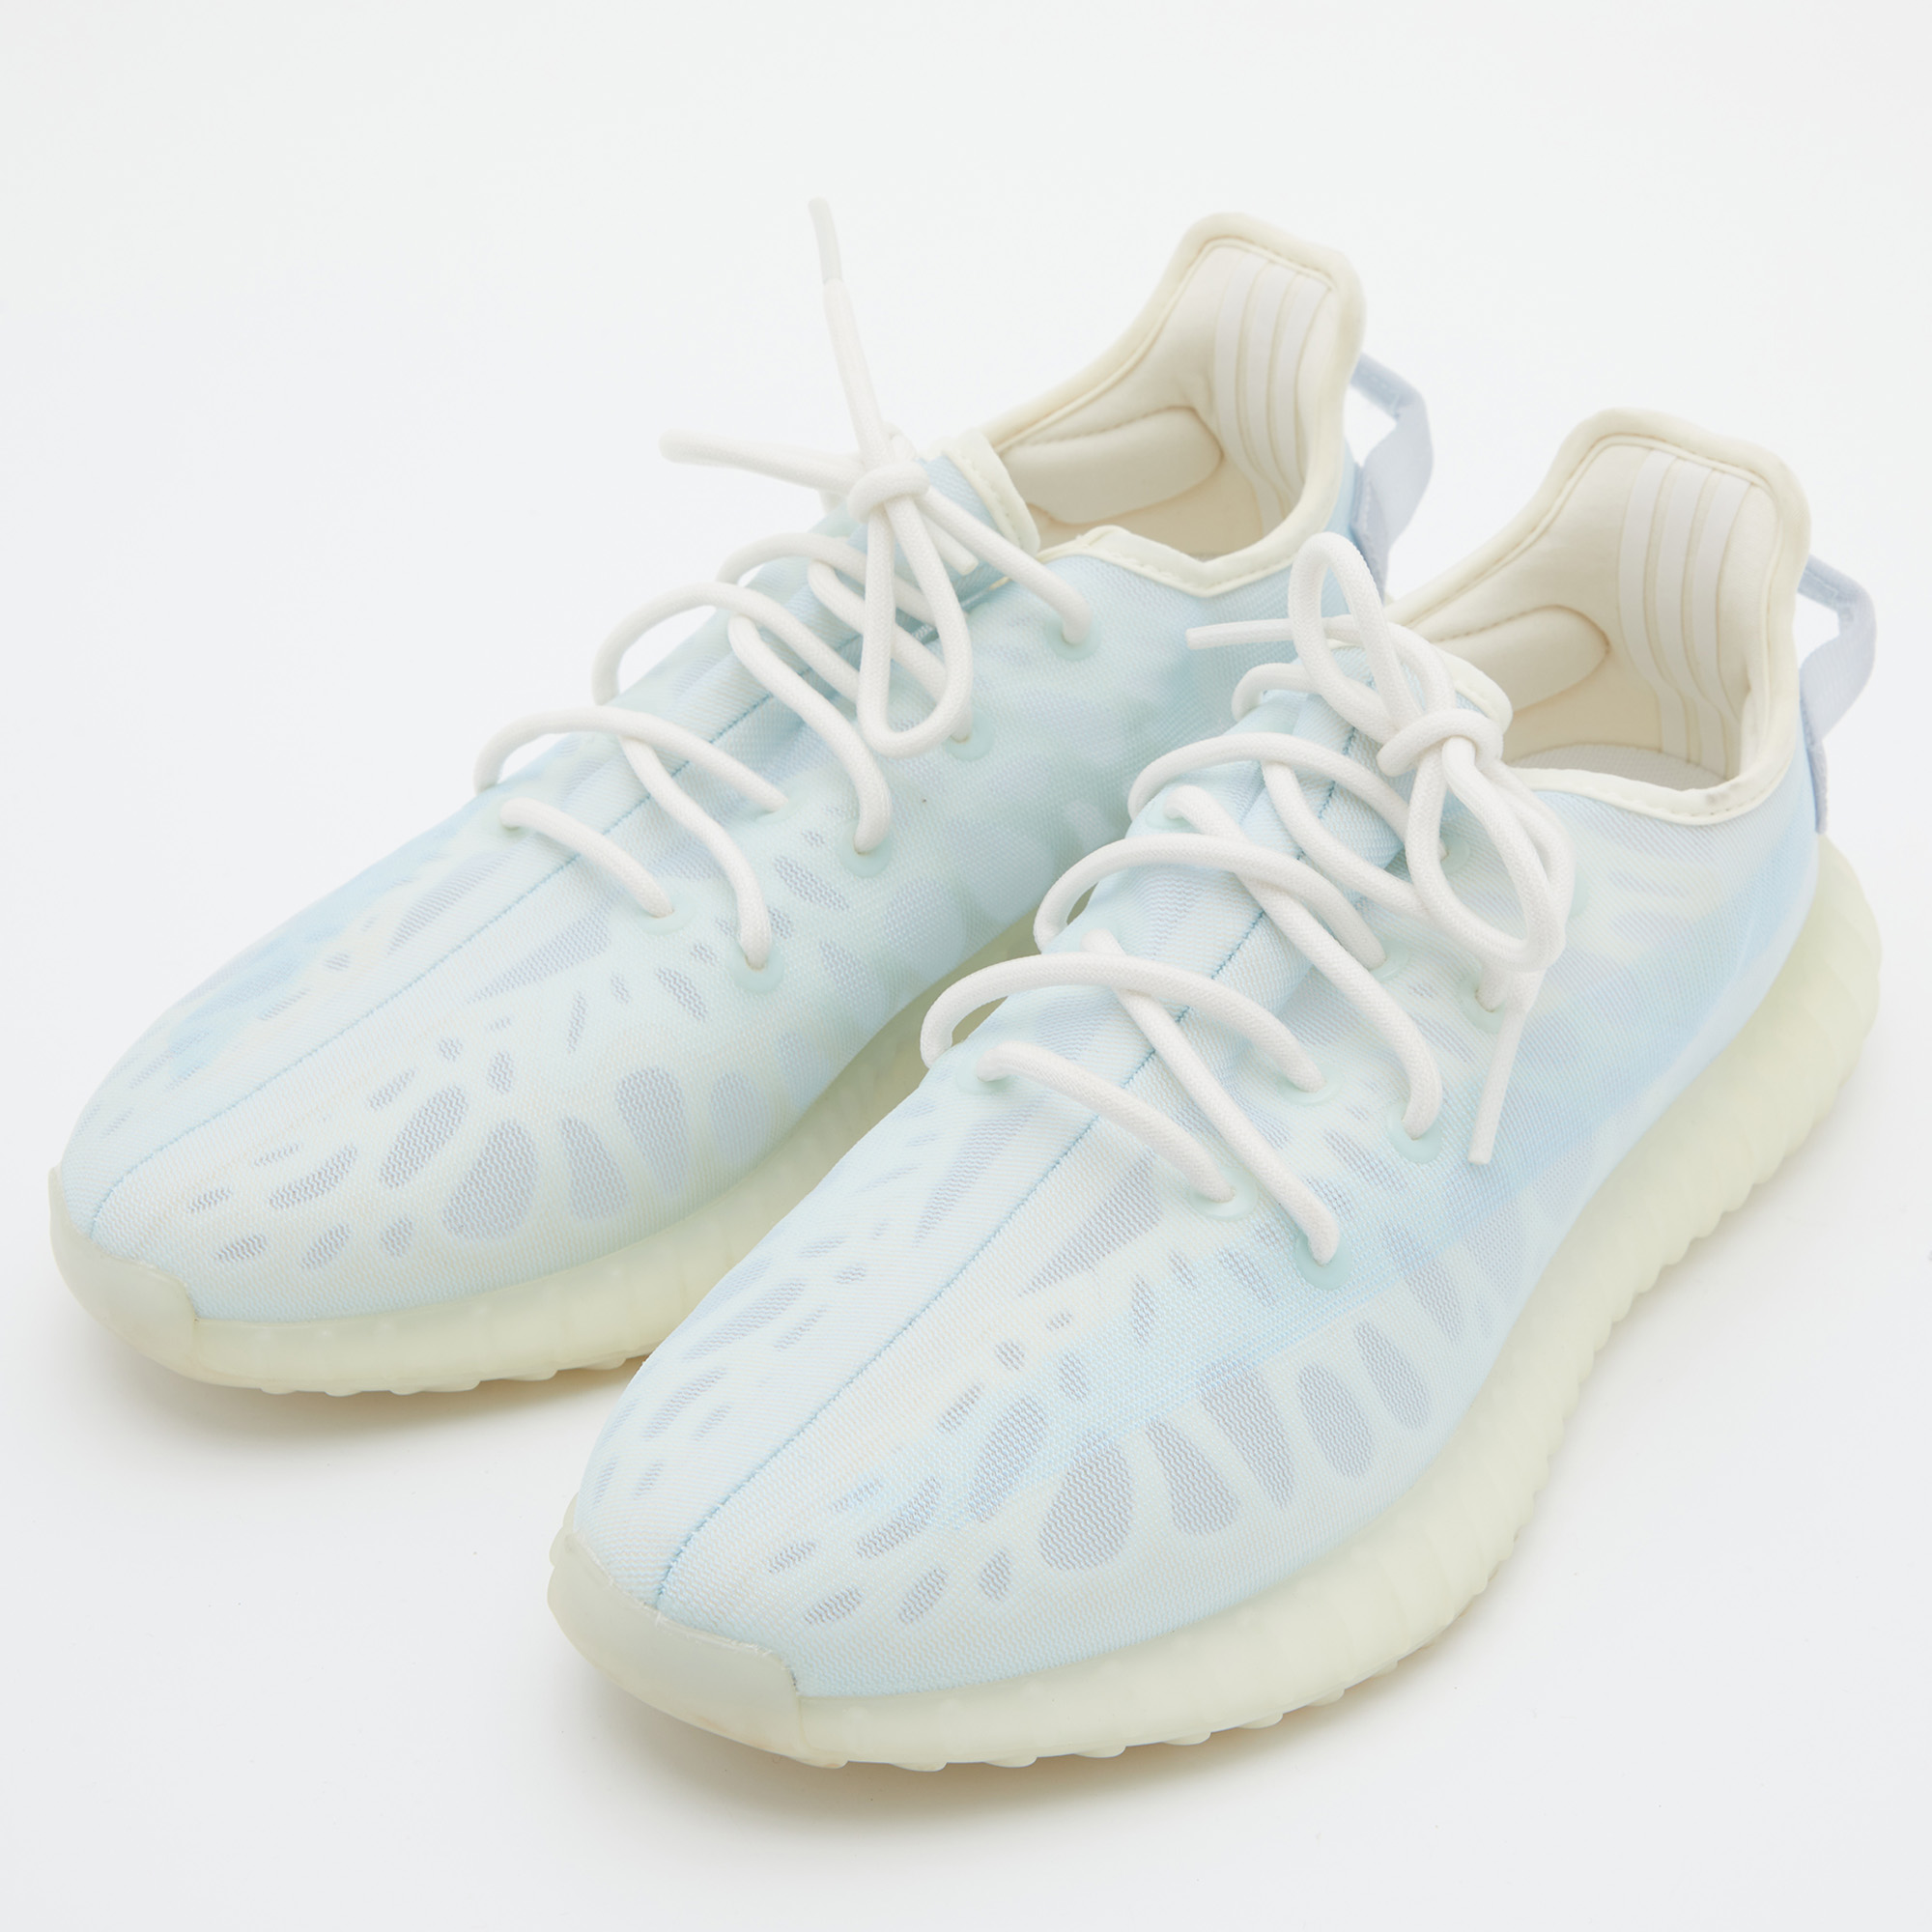 

Yeezy x Adidas Blue Mesh Boost 350 V2 Mono Ice Sneakers Size